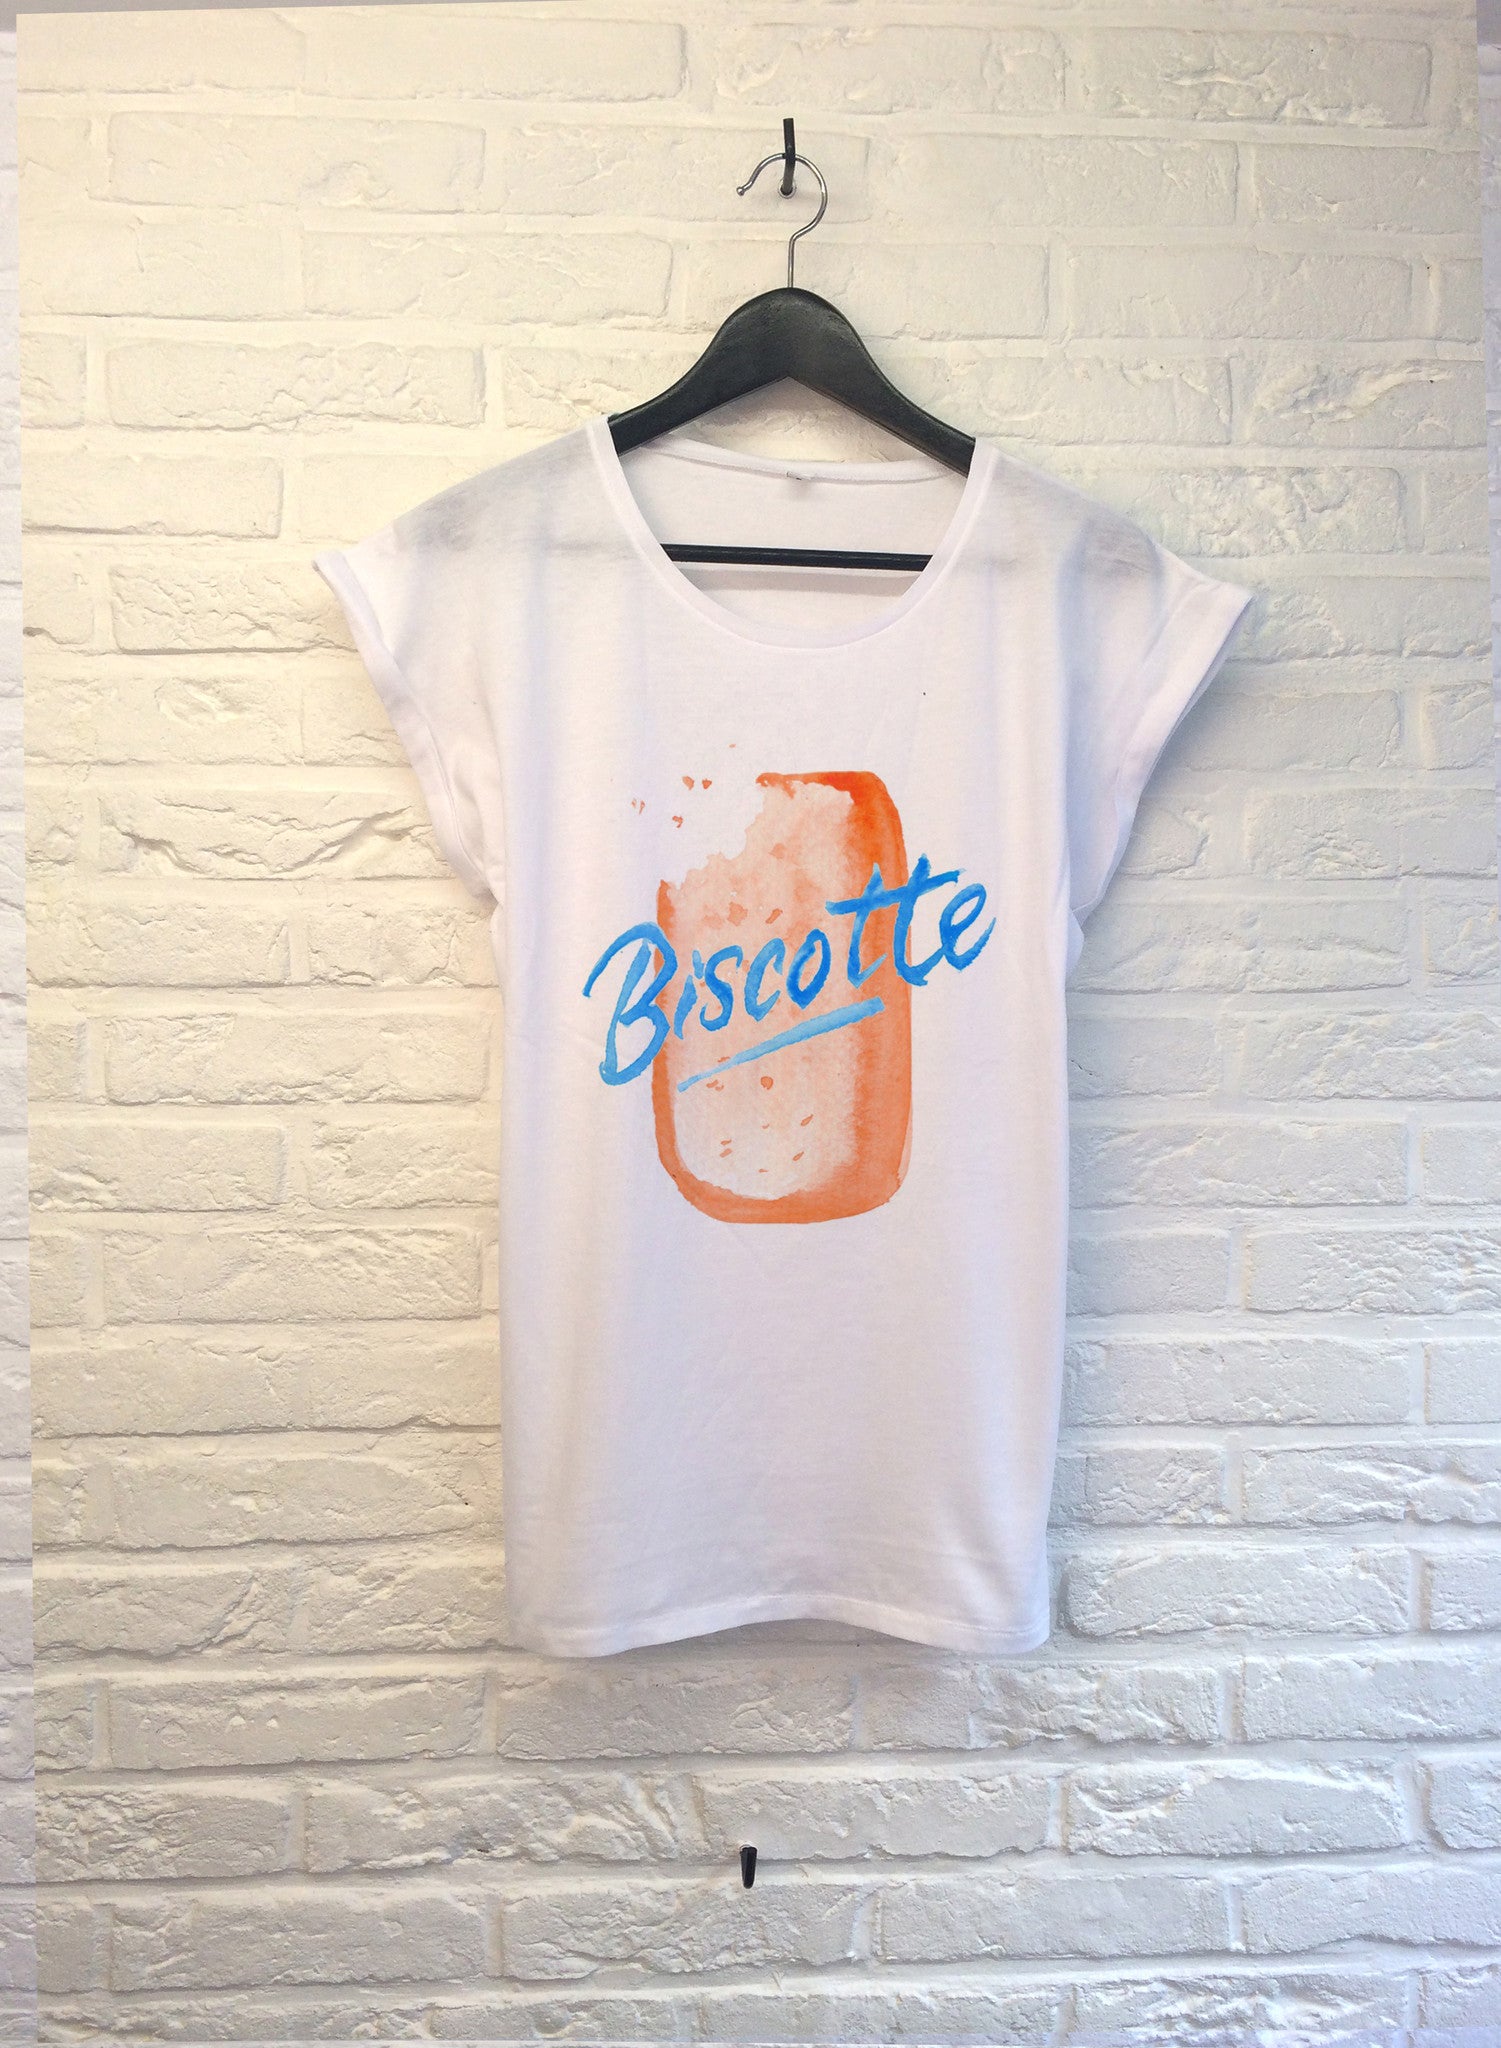 TH Gallery - Biscotte - Femme-T shirt-Atelier Amelot